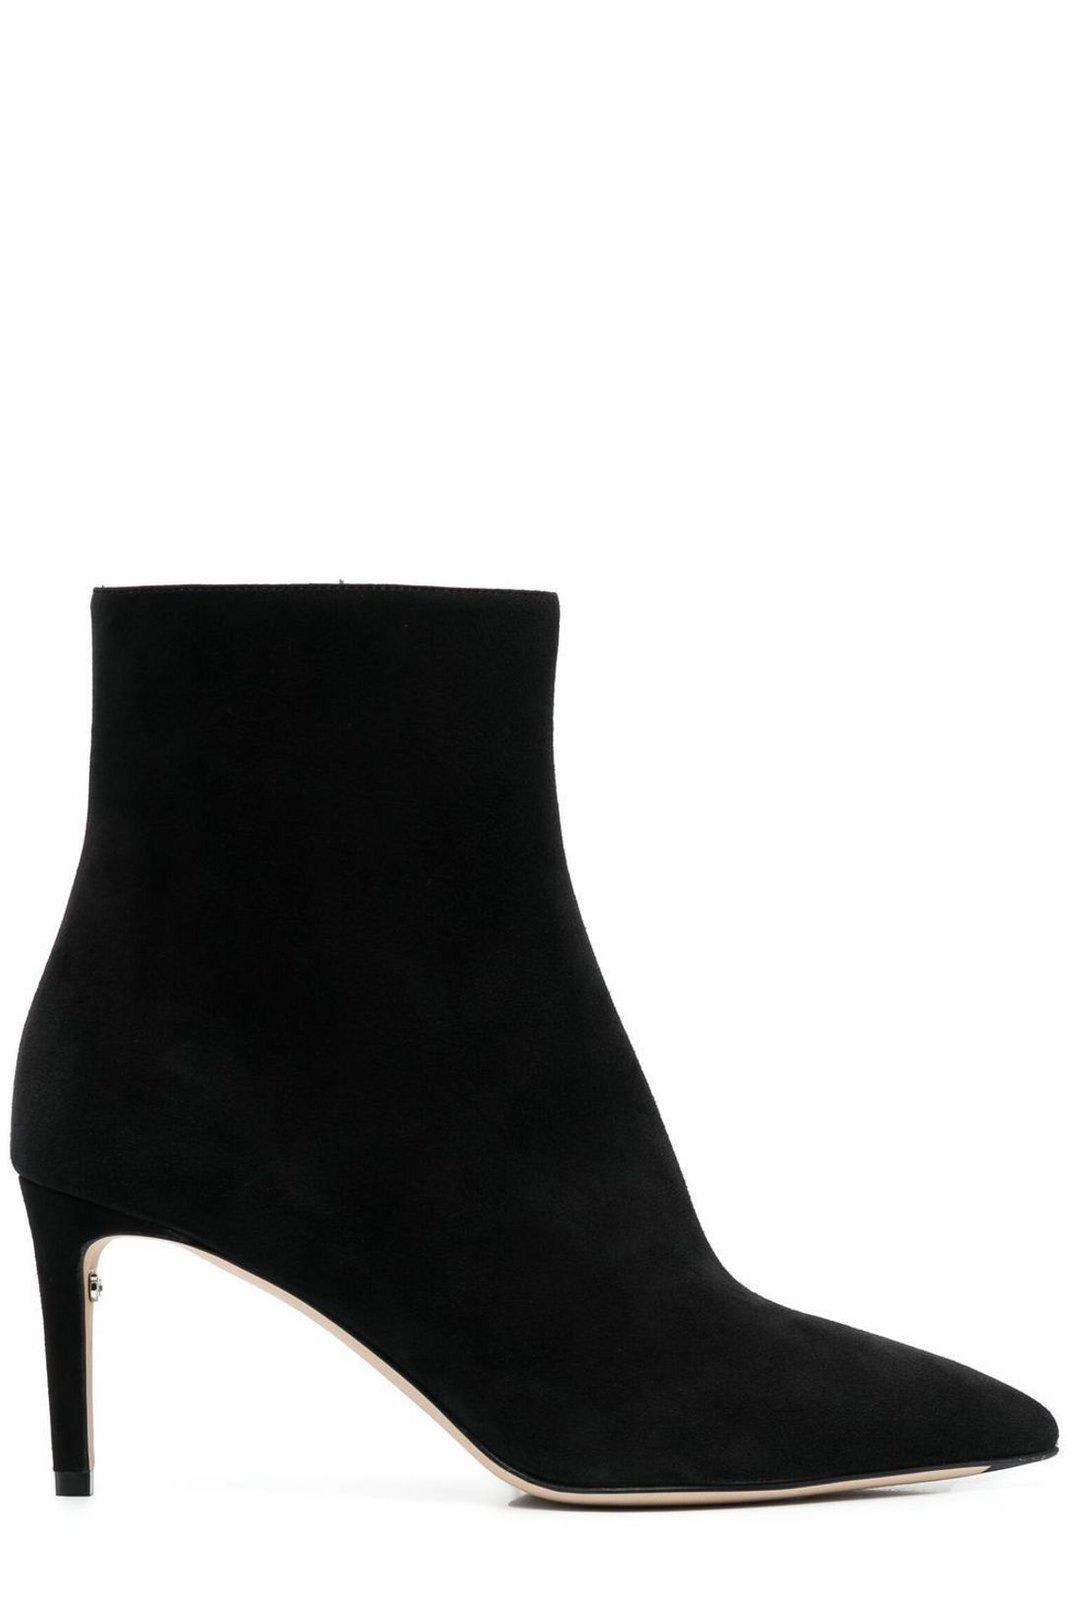 FERRAGAMO POINTED-TOE ANKLE BOOTS